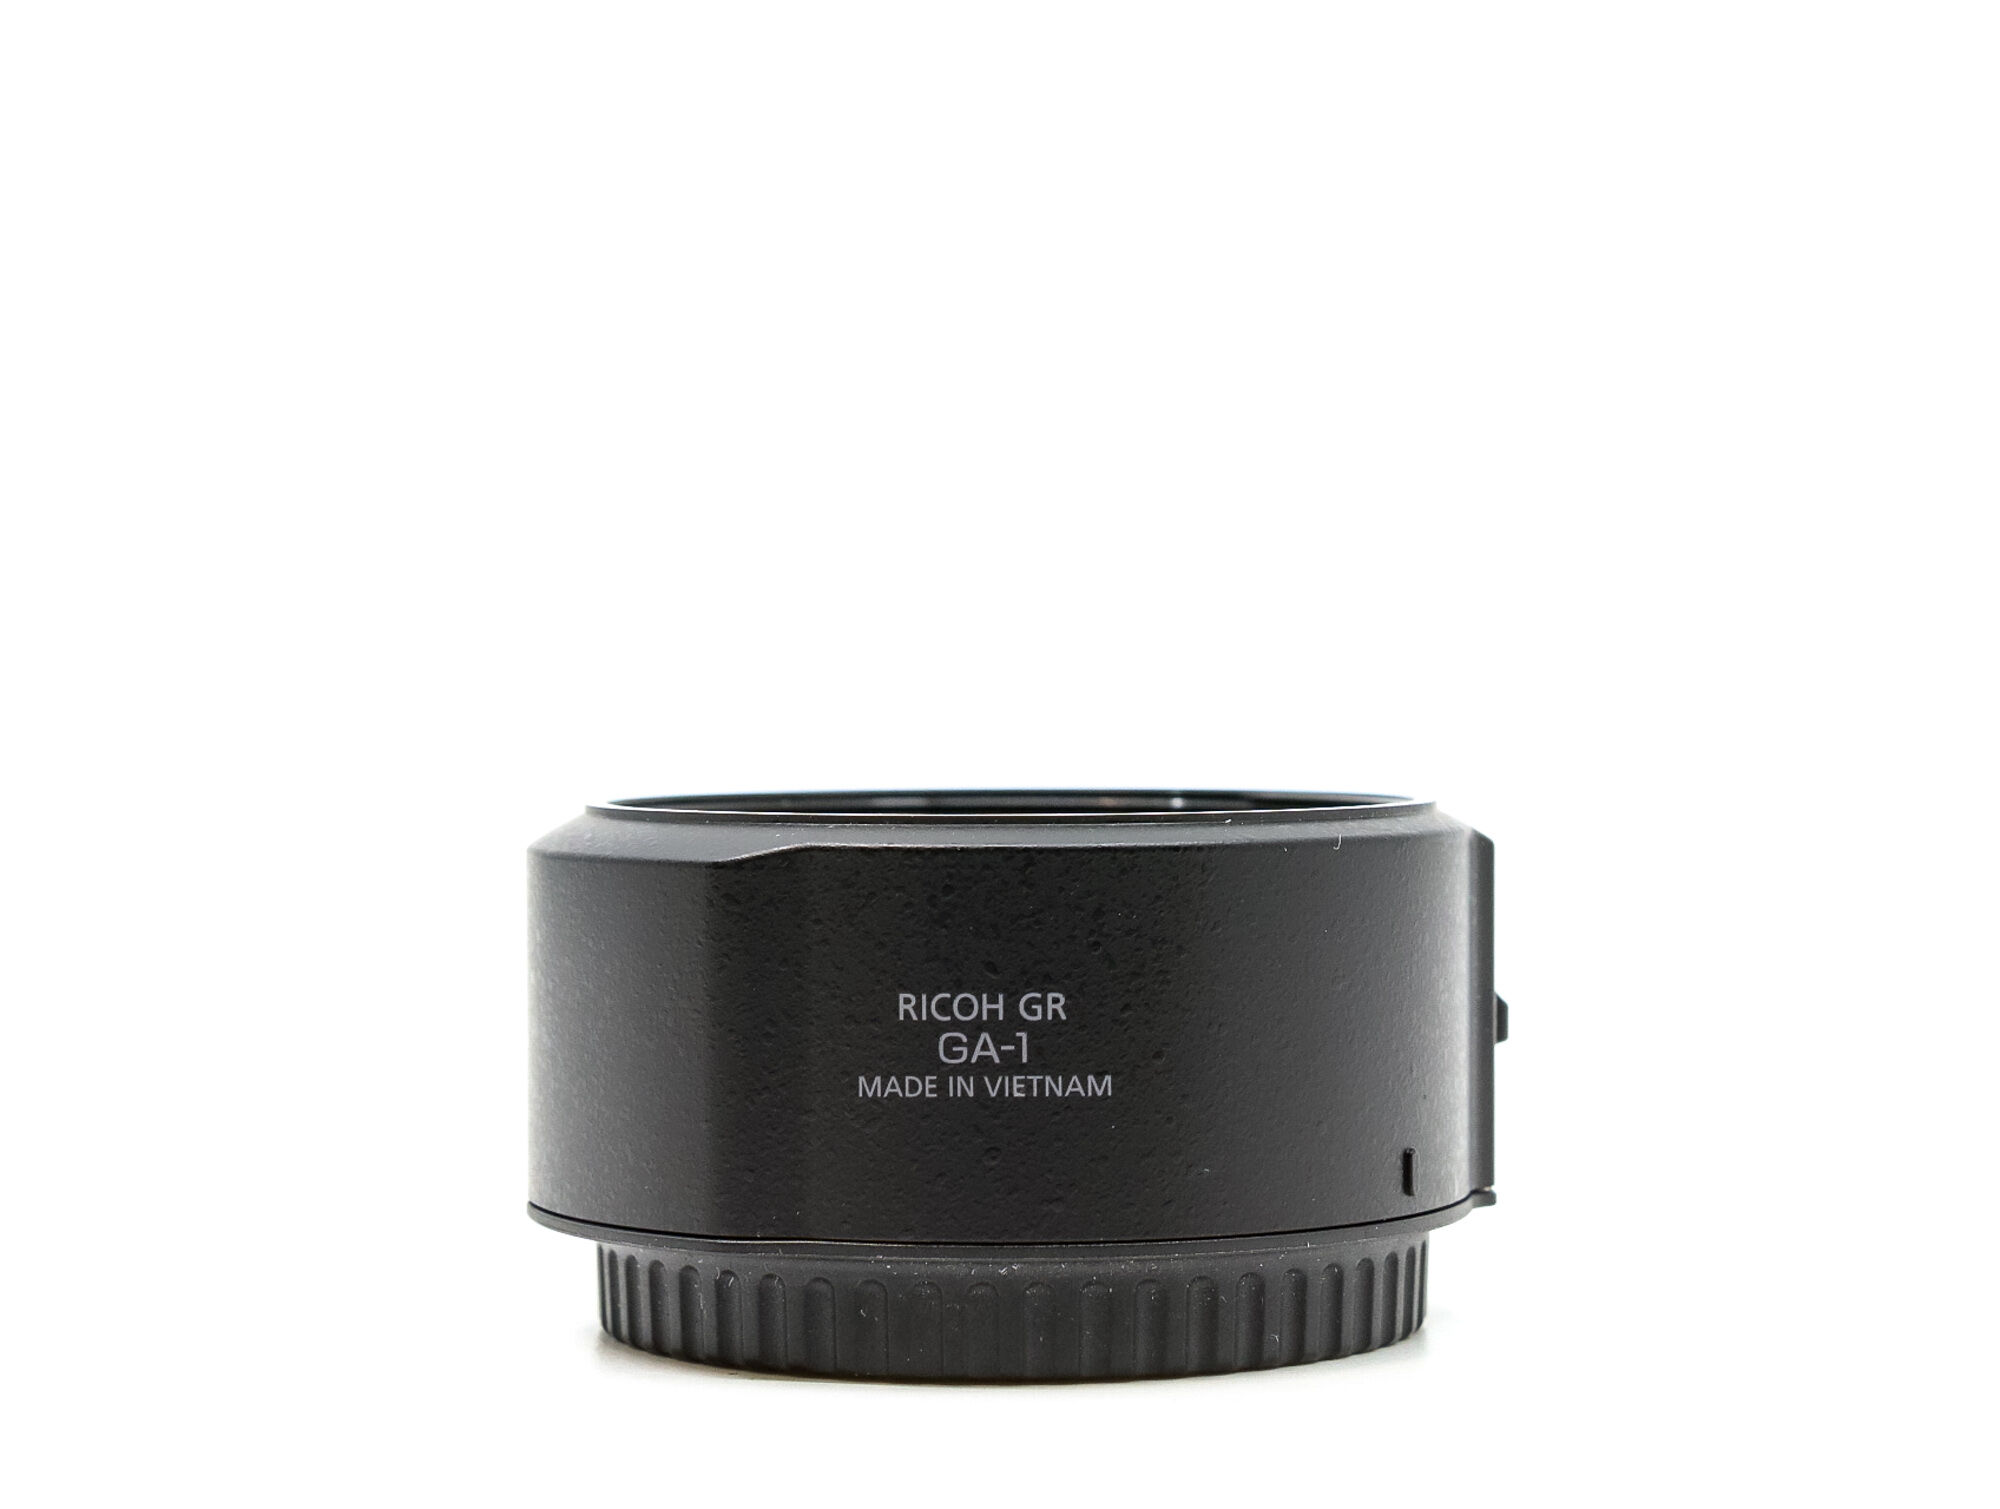 Ricoh GA-1 Lens Adapter (Condition: Like New)